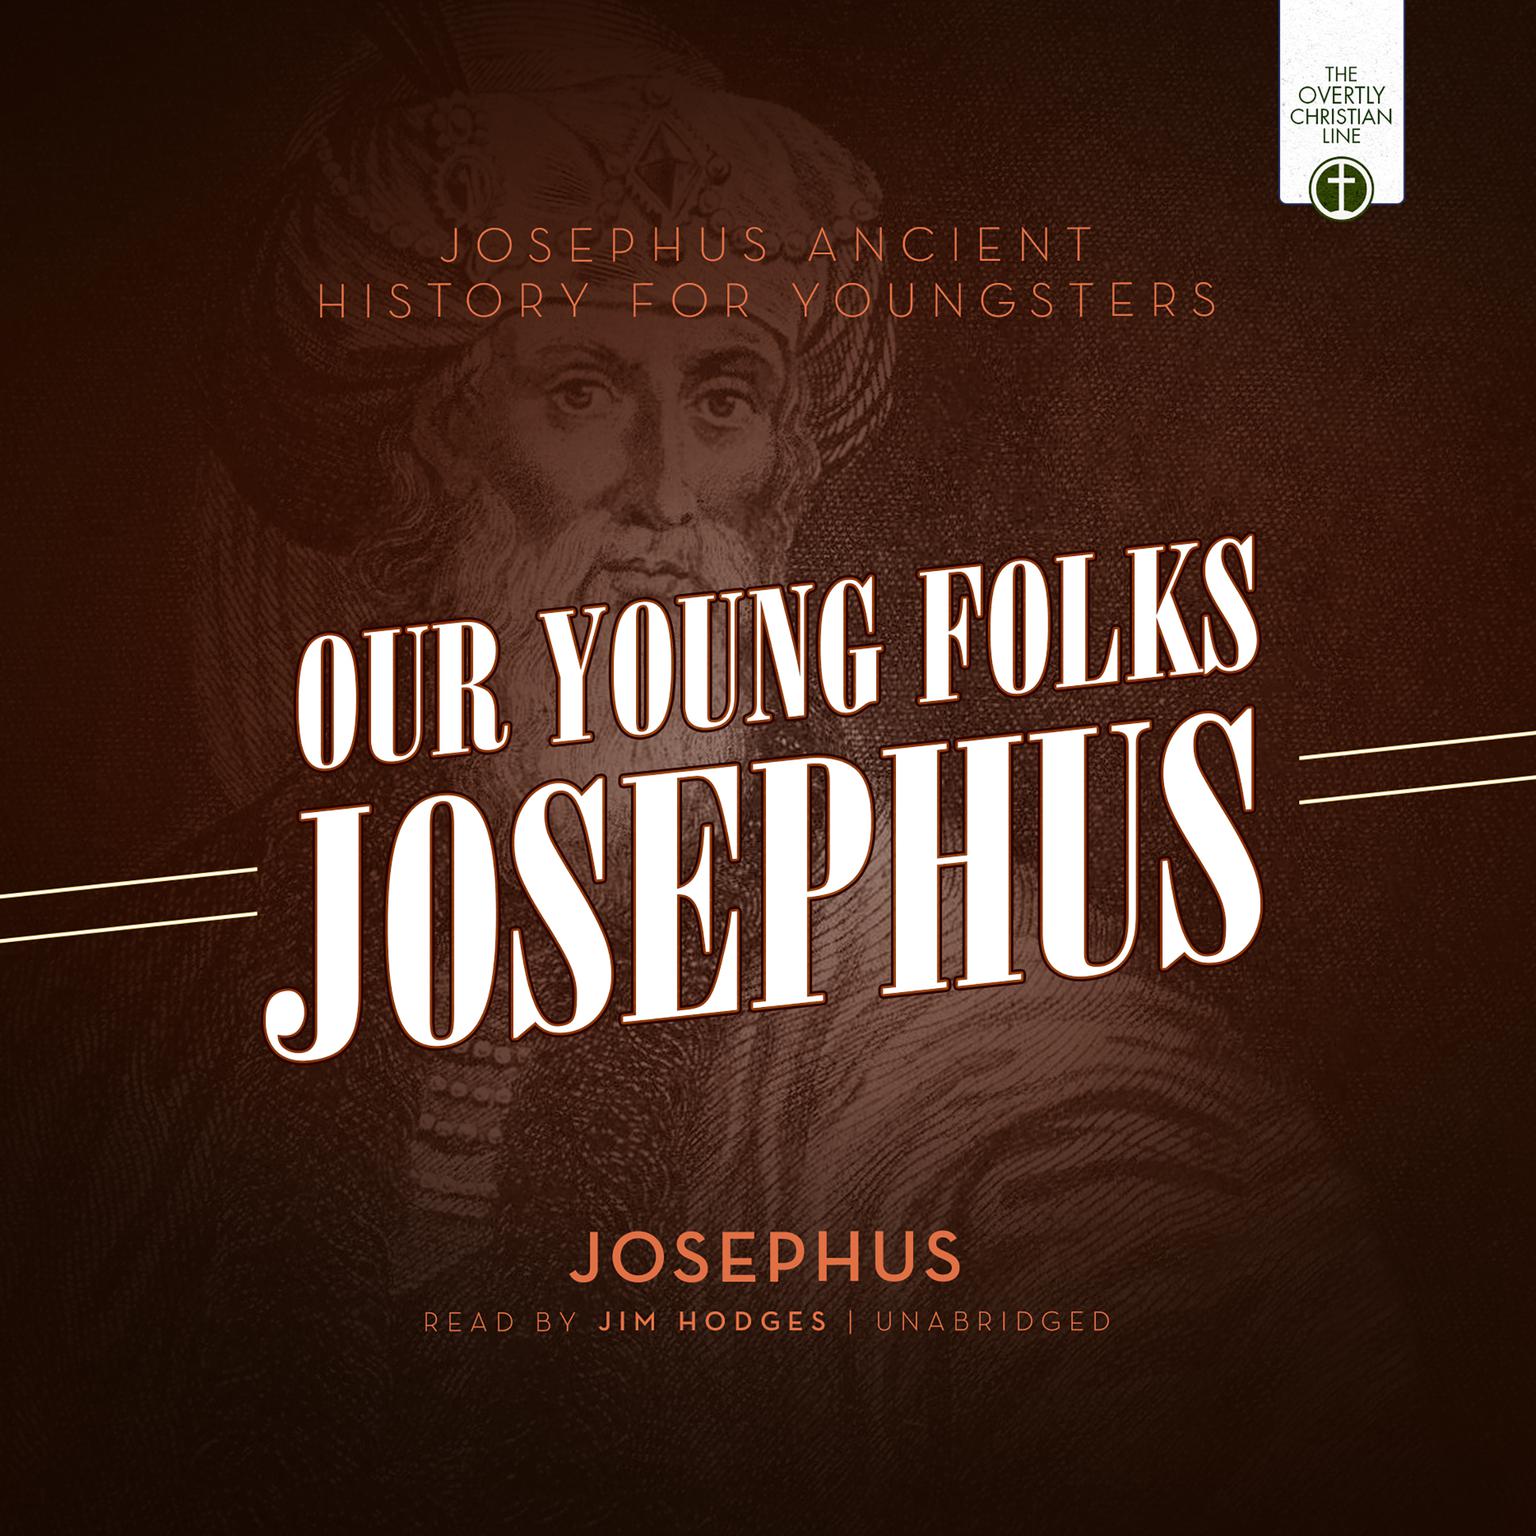 Our Young Folks Josephus: Josephus Ancient History for Youngsters Audiobook, by Josephus